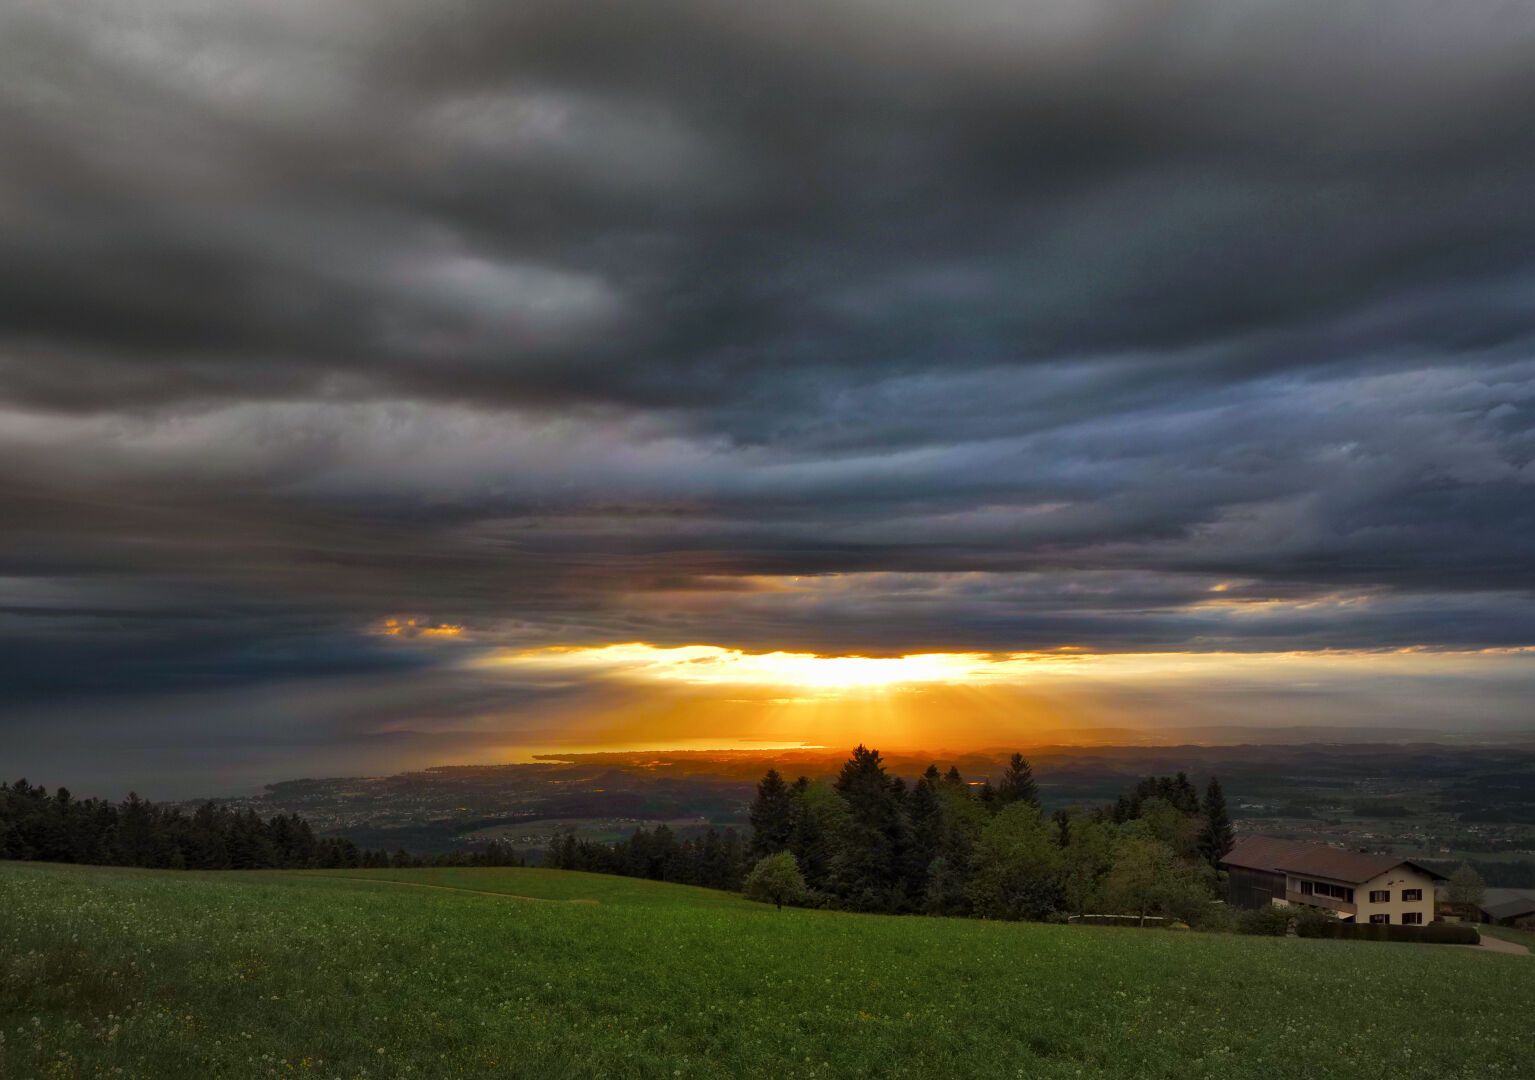 Before the storm

#stormyweather #stormclouds #sunbeam #lakeconstance #sunset #sunrays #landscapephotography #photography